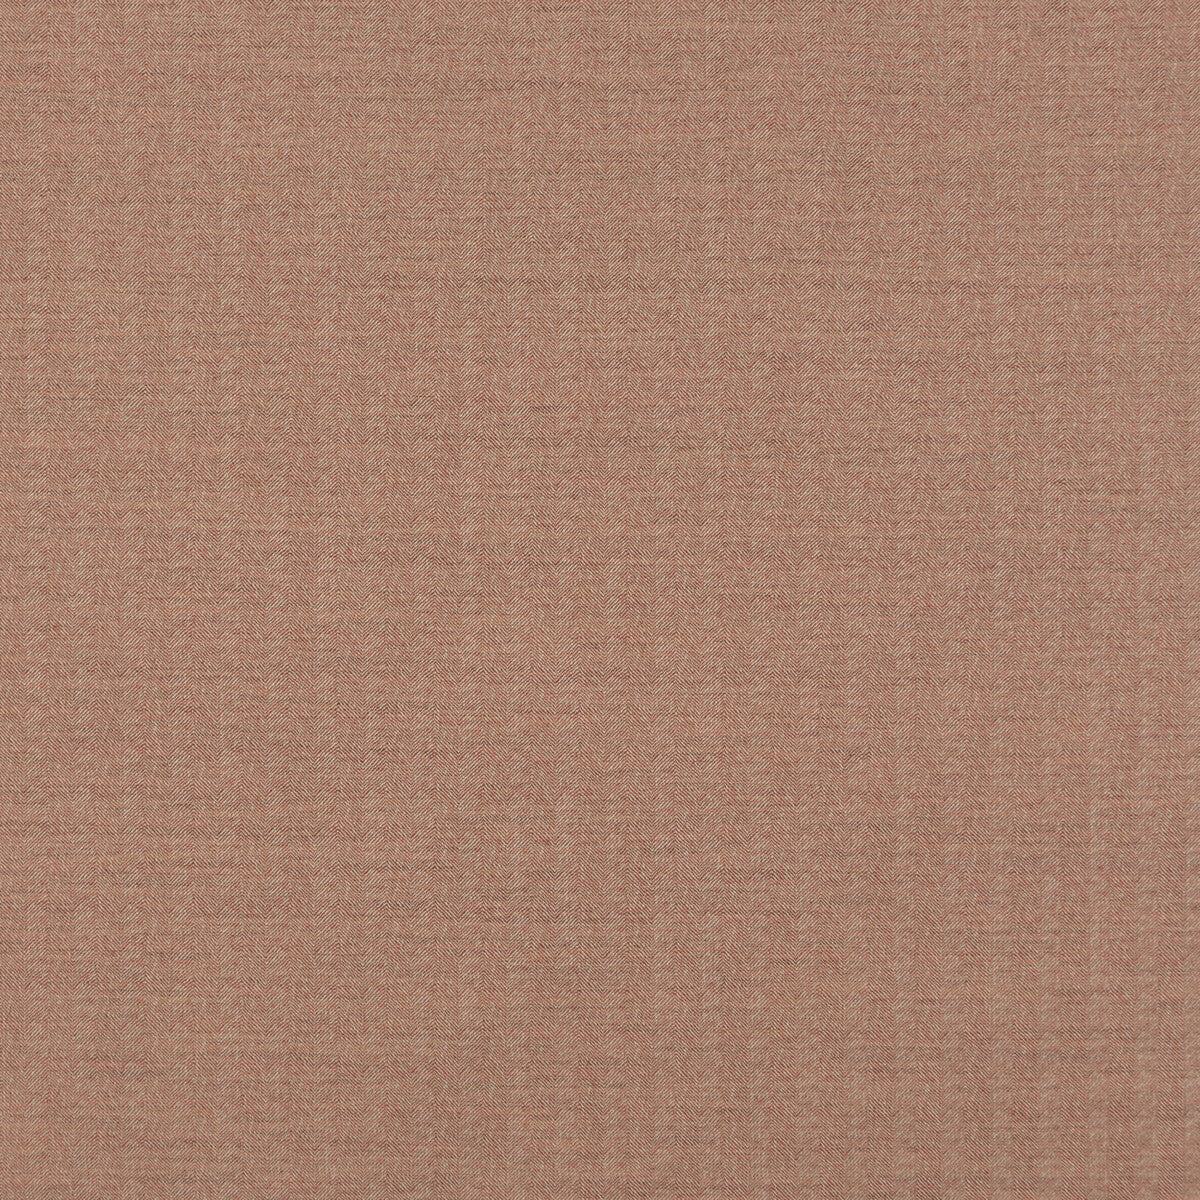 Canyon fabric in spice color - pattern BF10680.330.0 - by G P &amp; J Baker in the Essential Colours collection